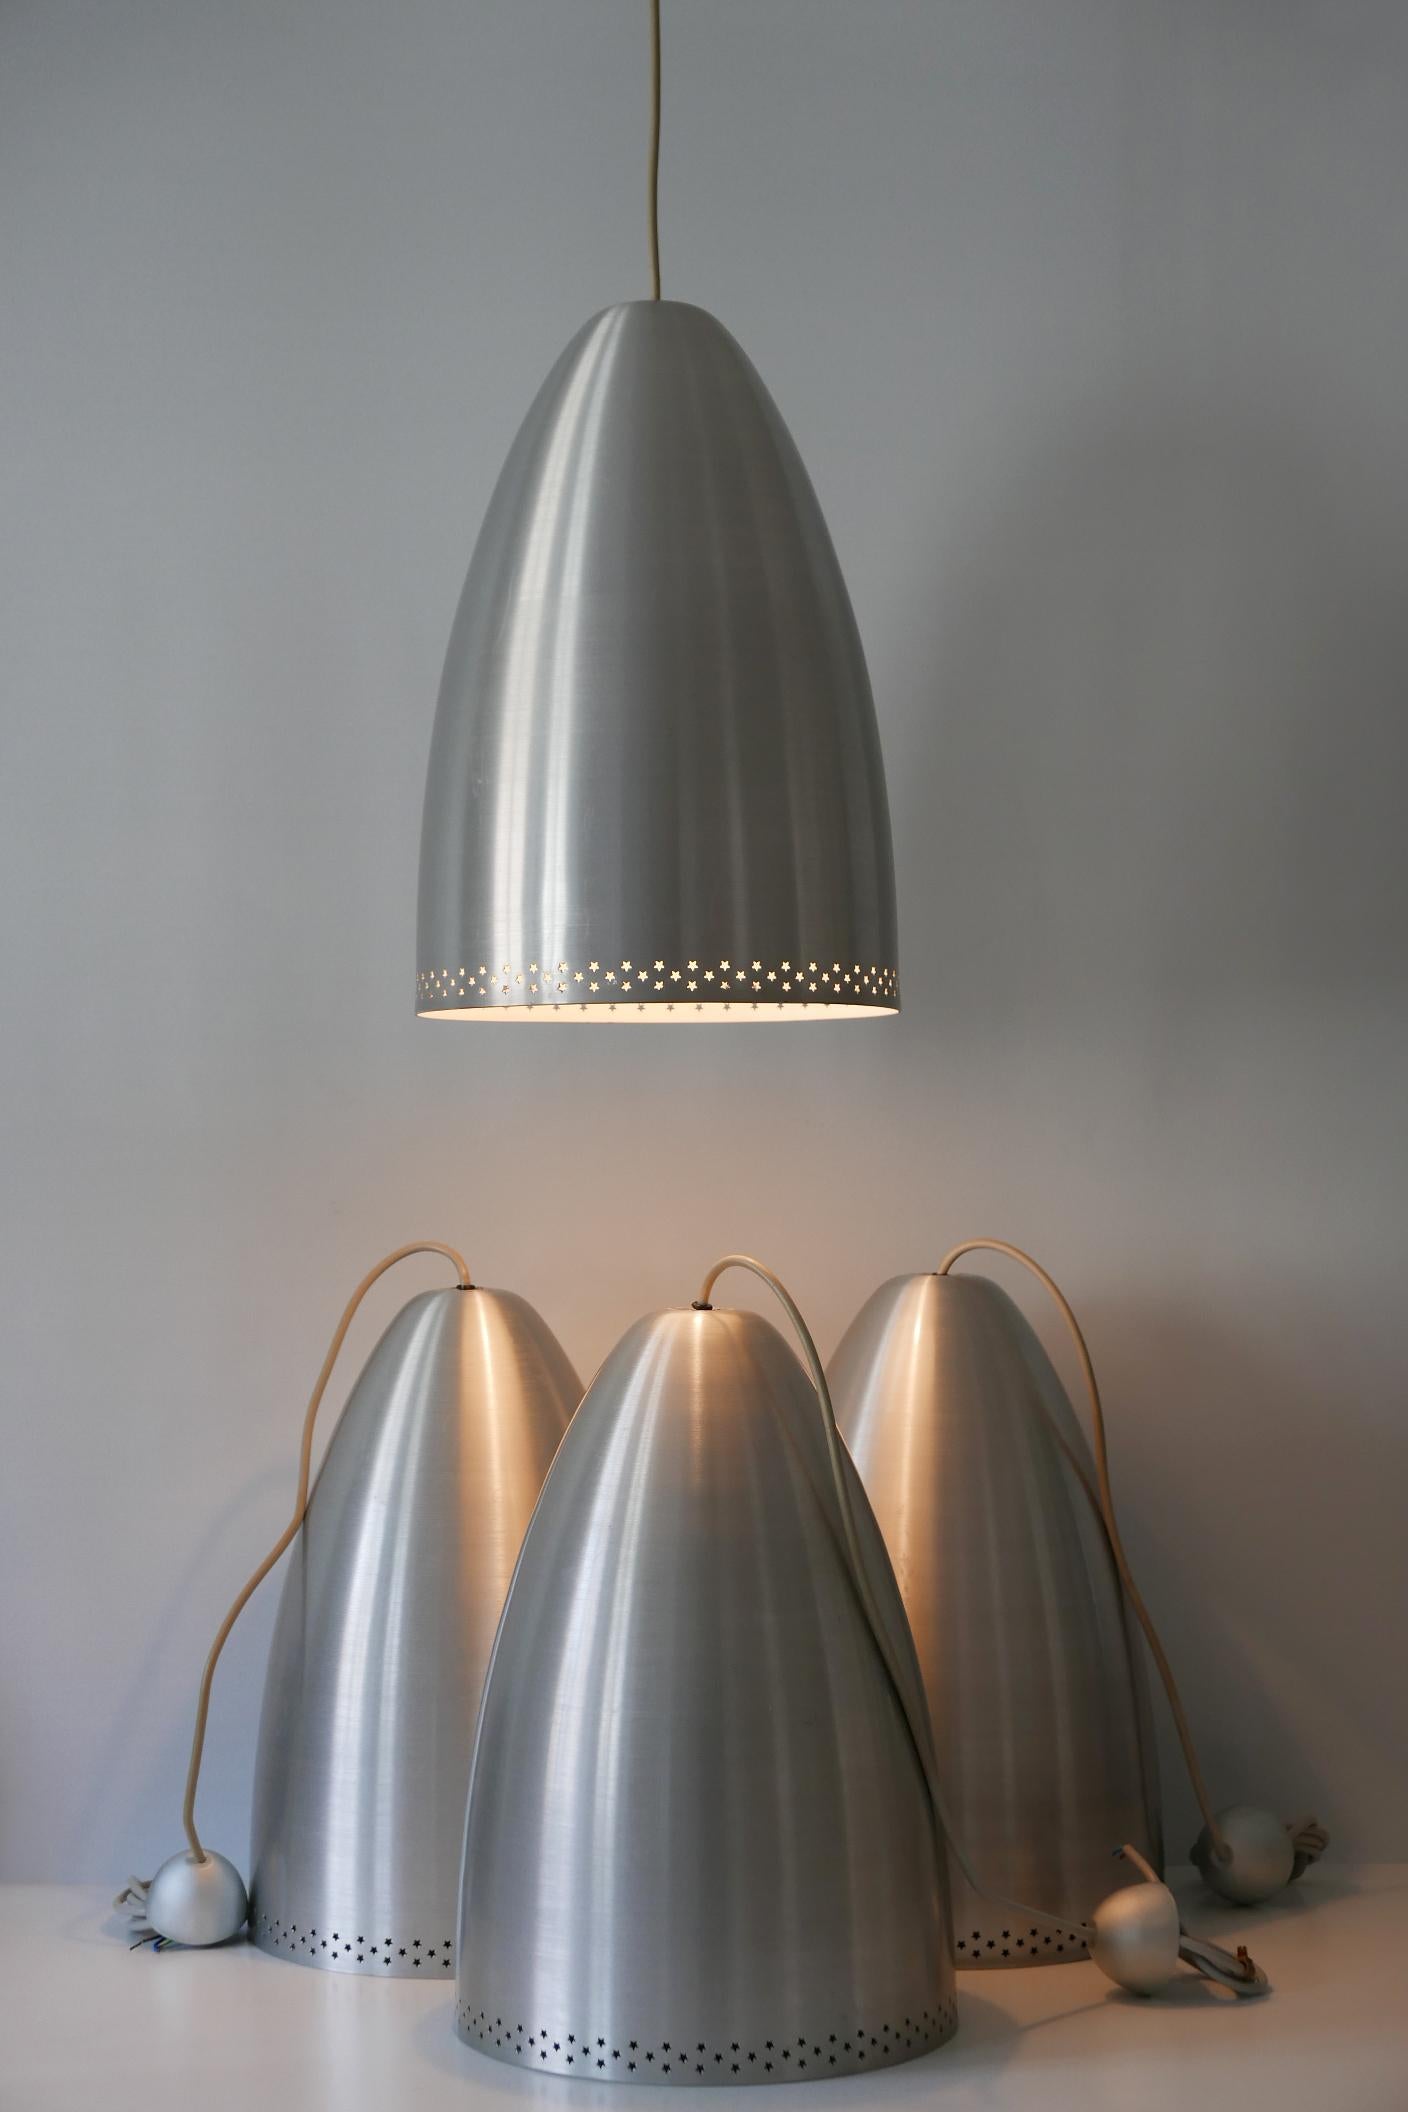 Elegant Mid-Century Modern pendant lamps or hanging lights. Manufactured in Germany circa 1970s.

Executed in perforated solid aluminum, each lamp comes with 1 x E27 Edison screw fit bulb holder, is wired, and in working condition. It runs both on